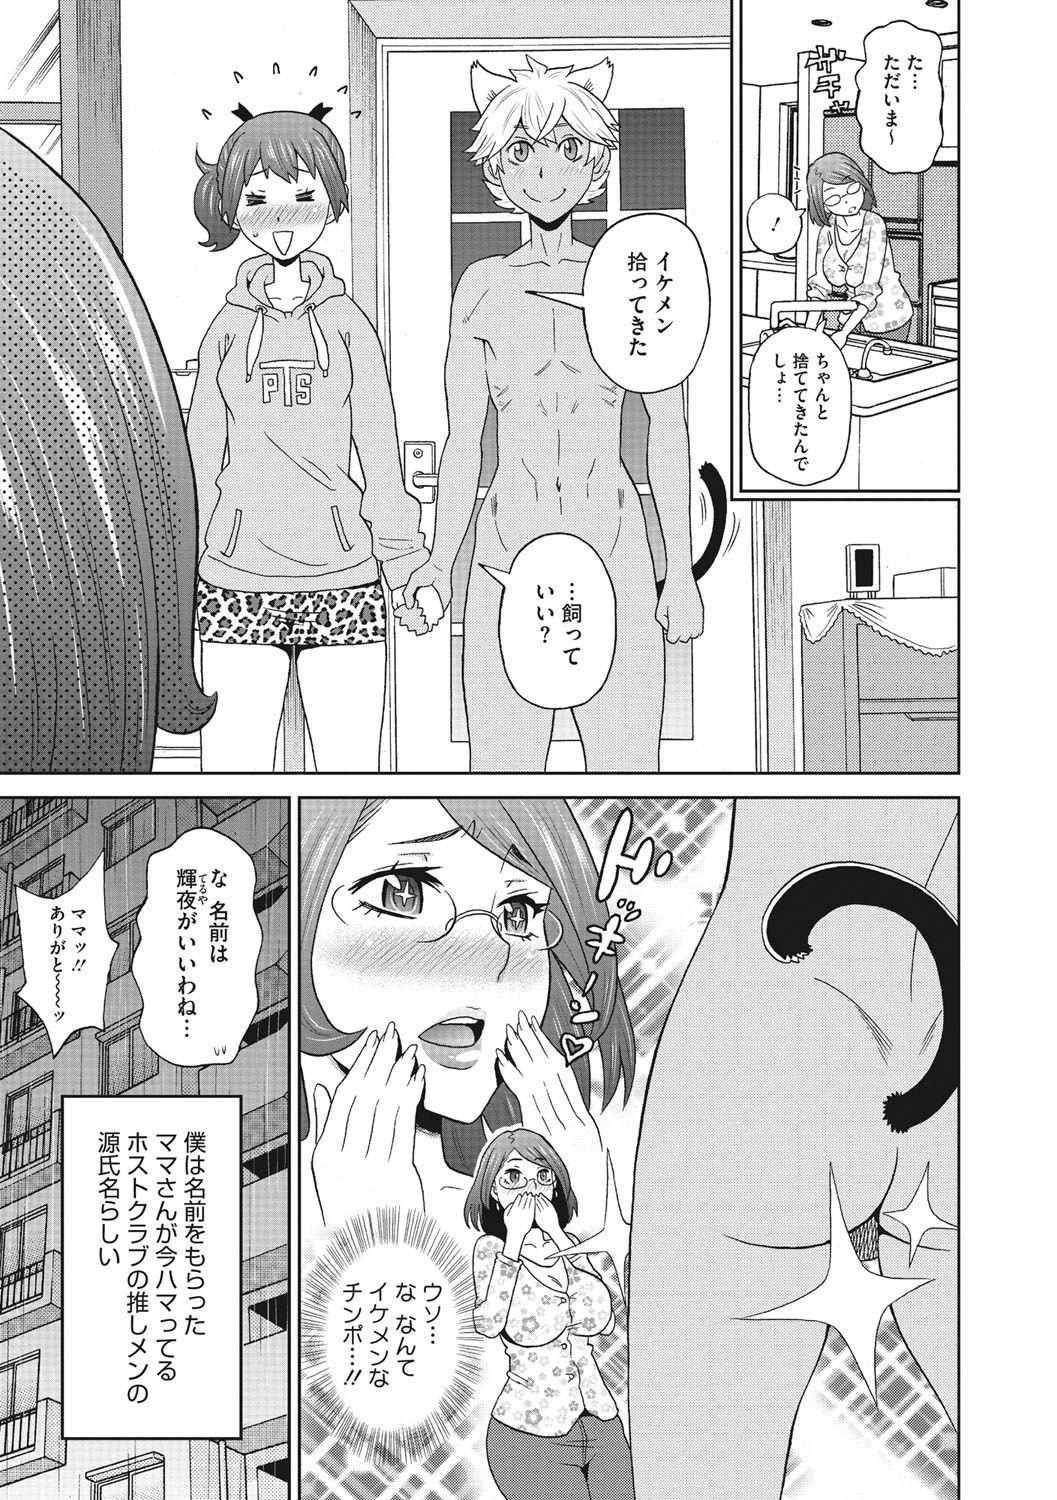 Private Itoshiki Acmate - My Lovely Acmate Foreplay - Page 6